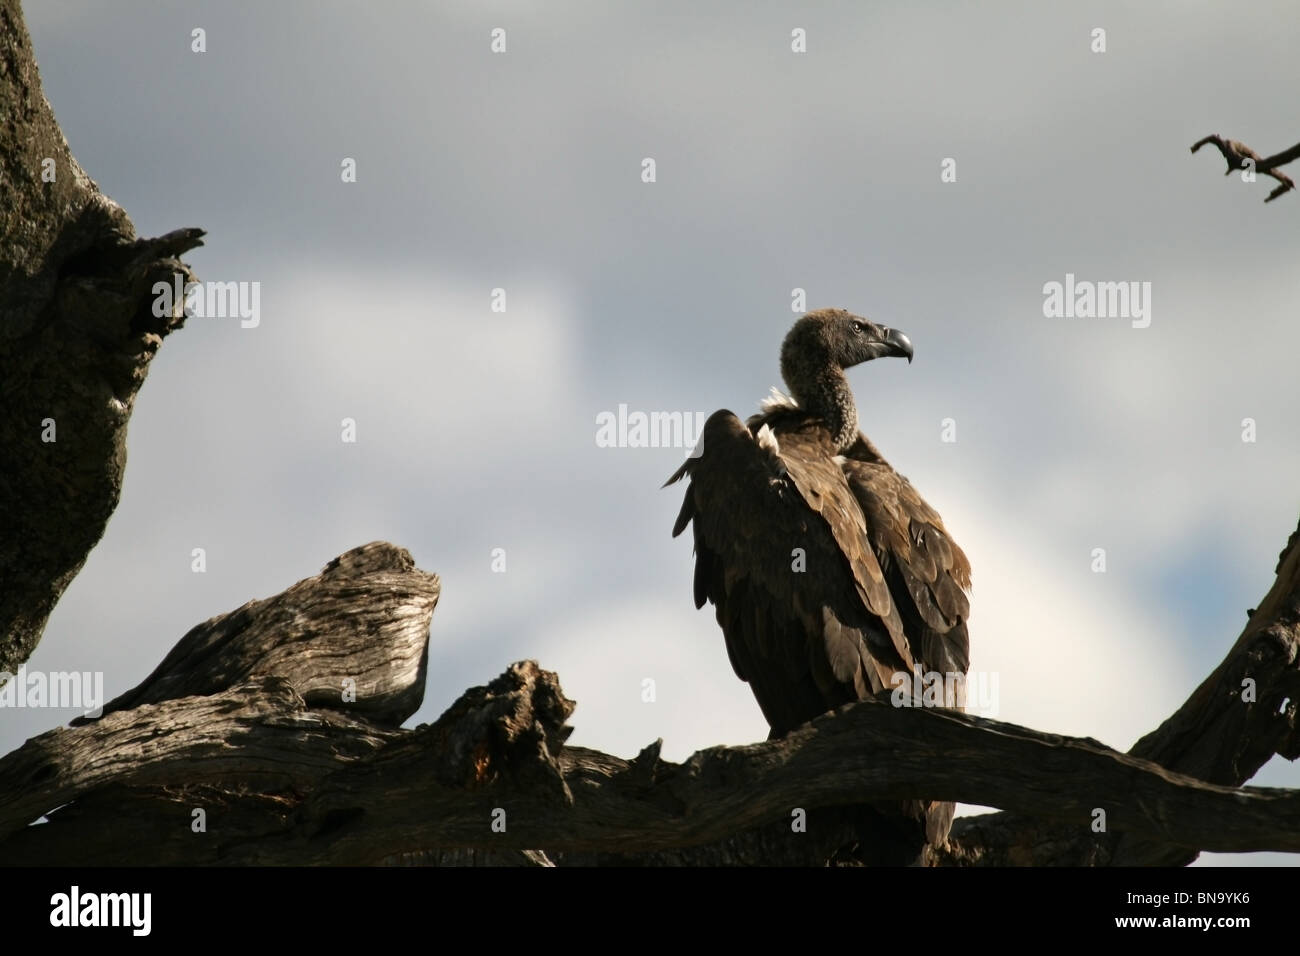 Griffon Vulture Silhouette. Picture taken in Masai Mara National Reserve, Kenya, East Africa Stock Photo